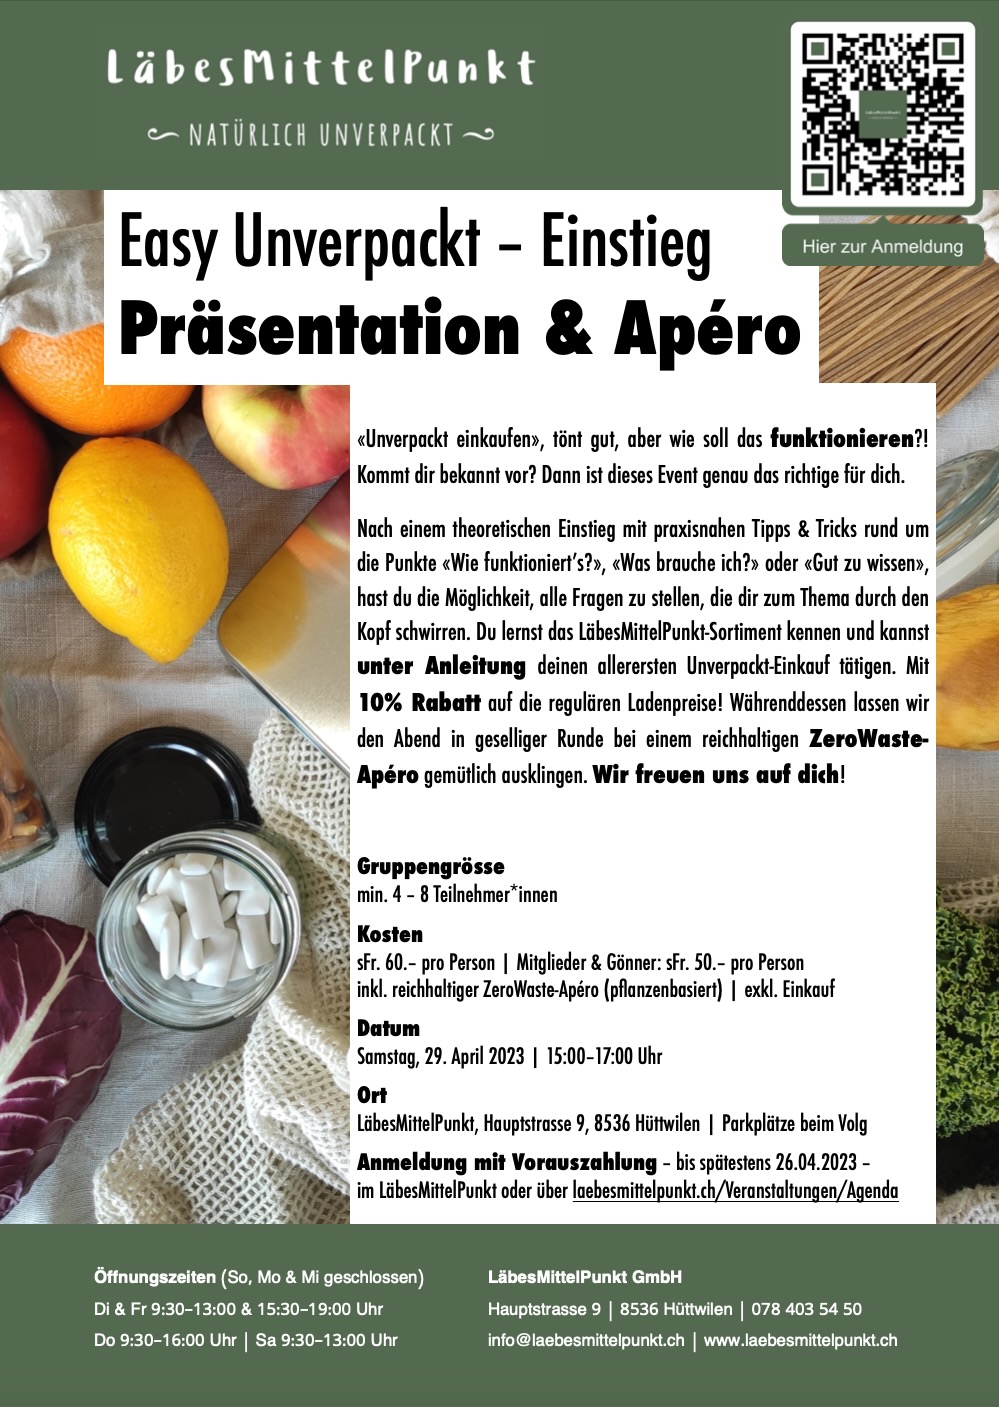 Anmeldung "Easy Unverpackt" (29.04.2023)